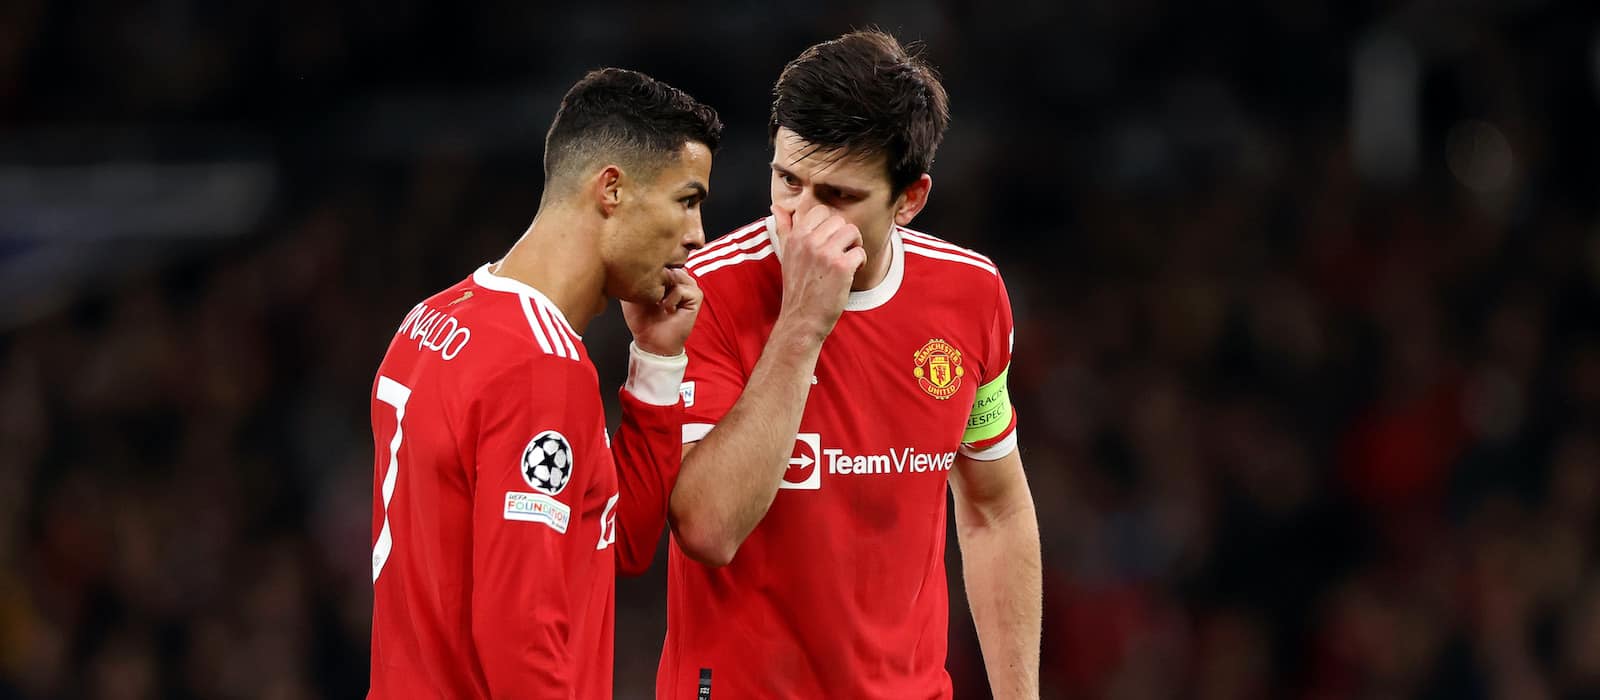 Manchester United: Man United captain Harry Maguire rubbishes reports of rifts between him and Cristiano Ronaldo amid 'change of Captaincy' rumours